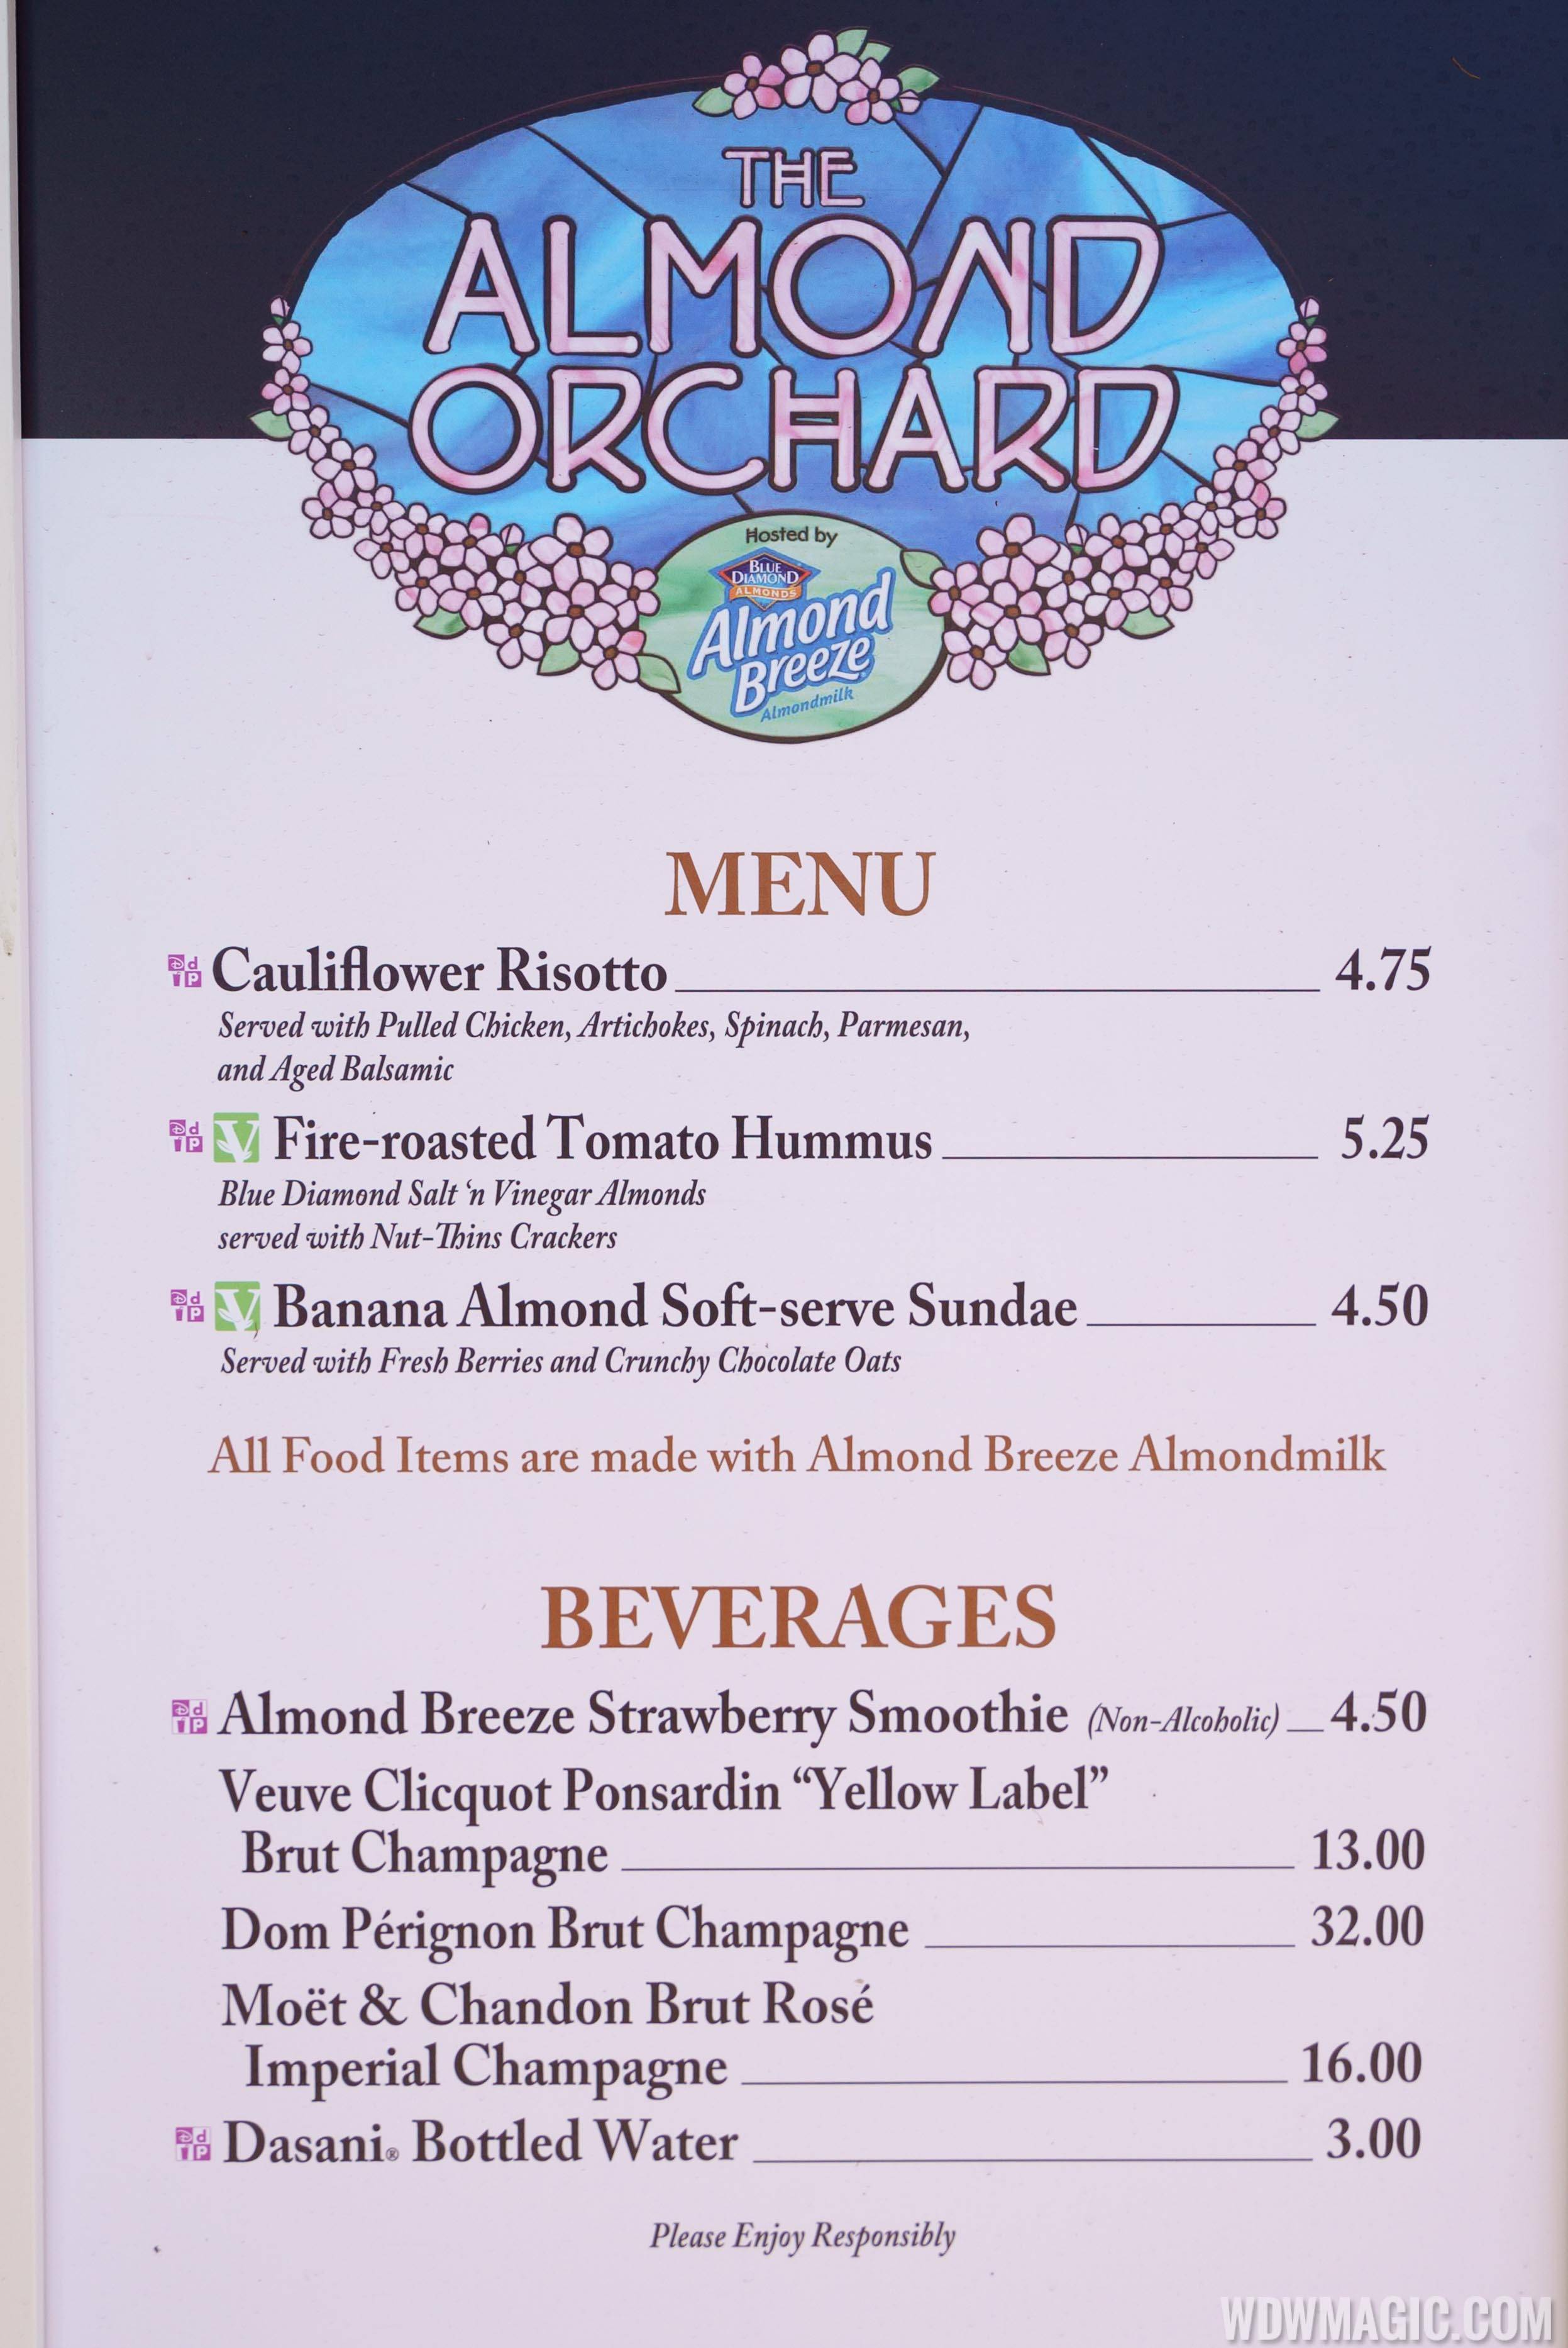 2017 Epcot Food and Wine Festival - The Almond Orchard marketplace kiosk menu